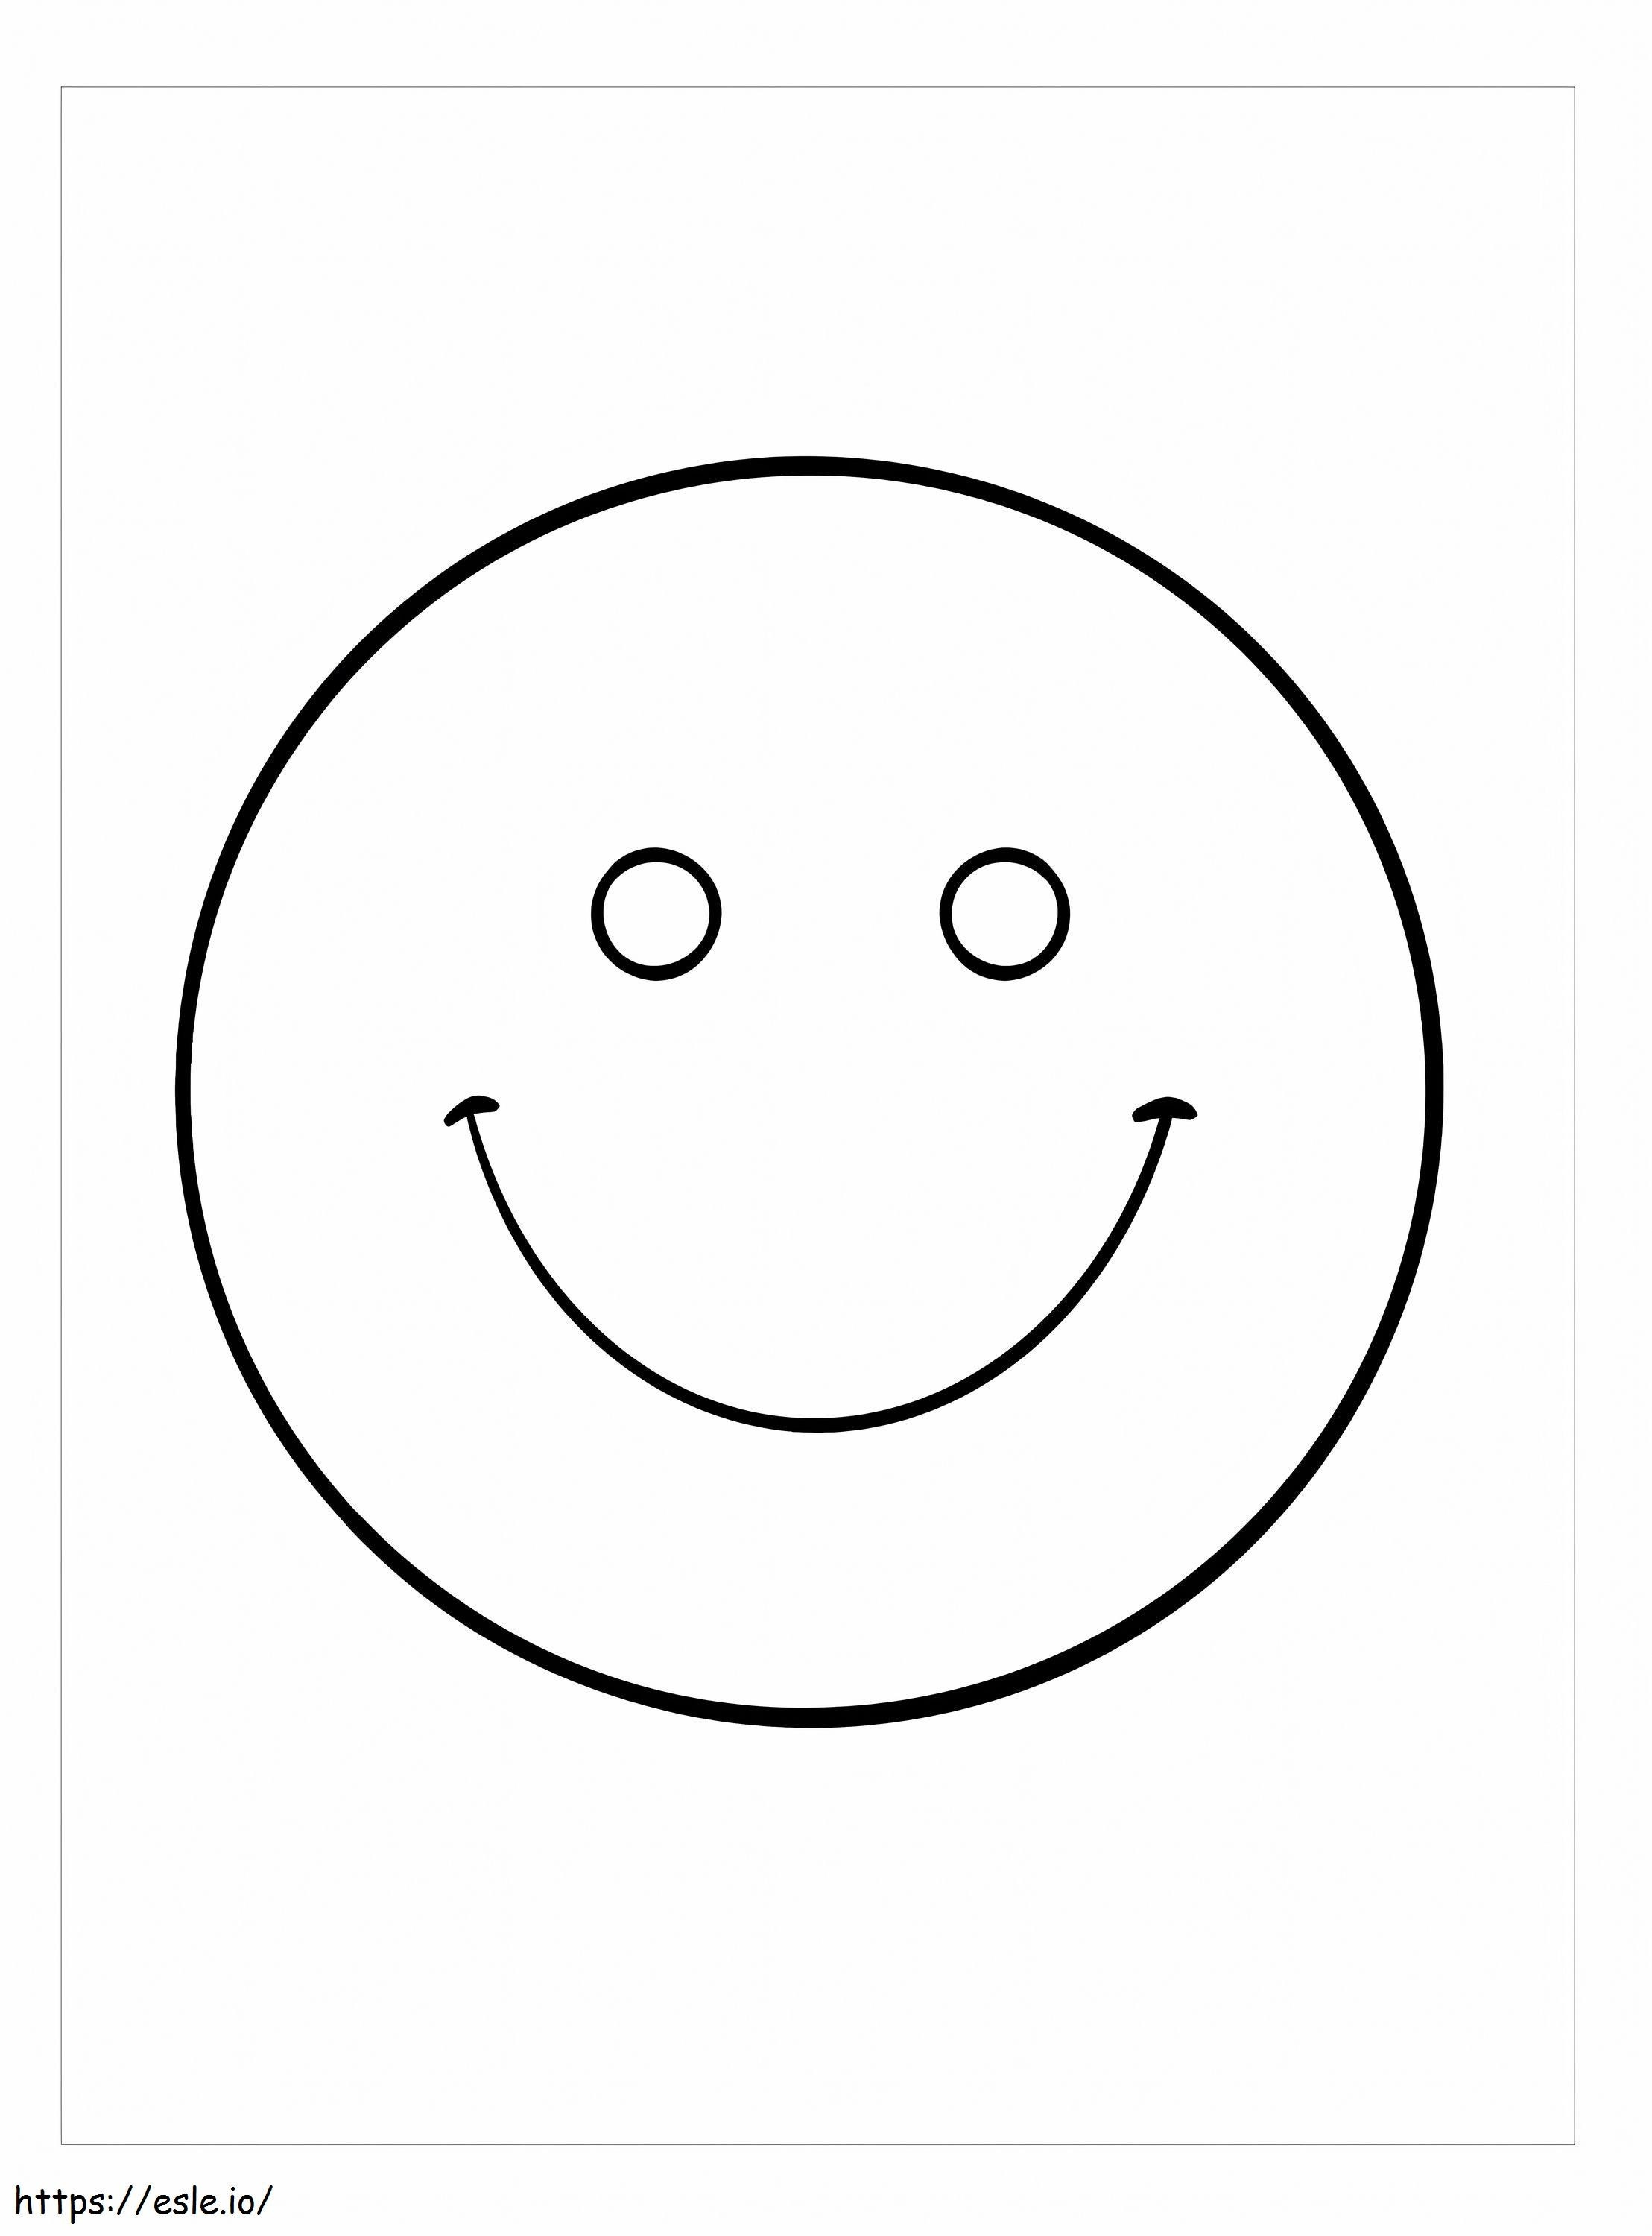 Normal Smiling Face coloring page